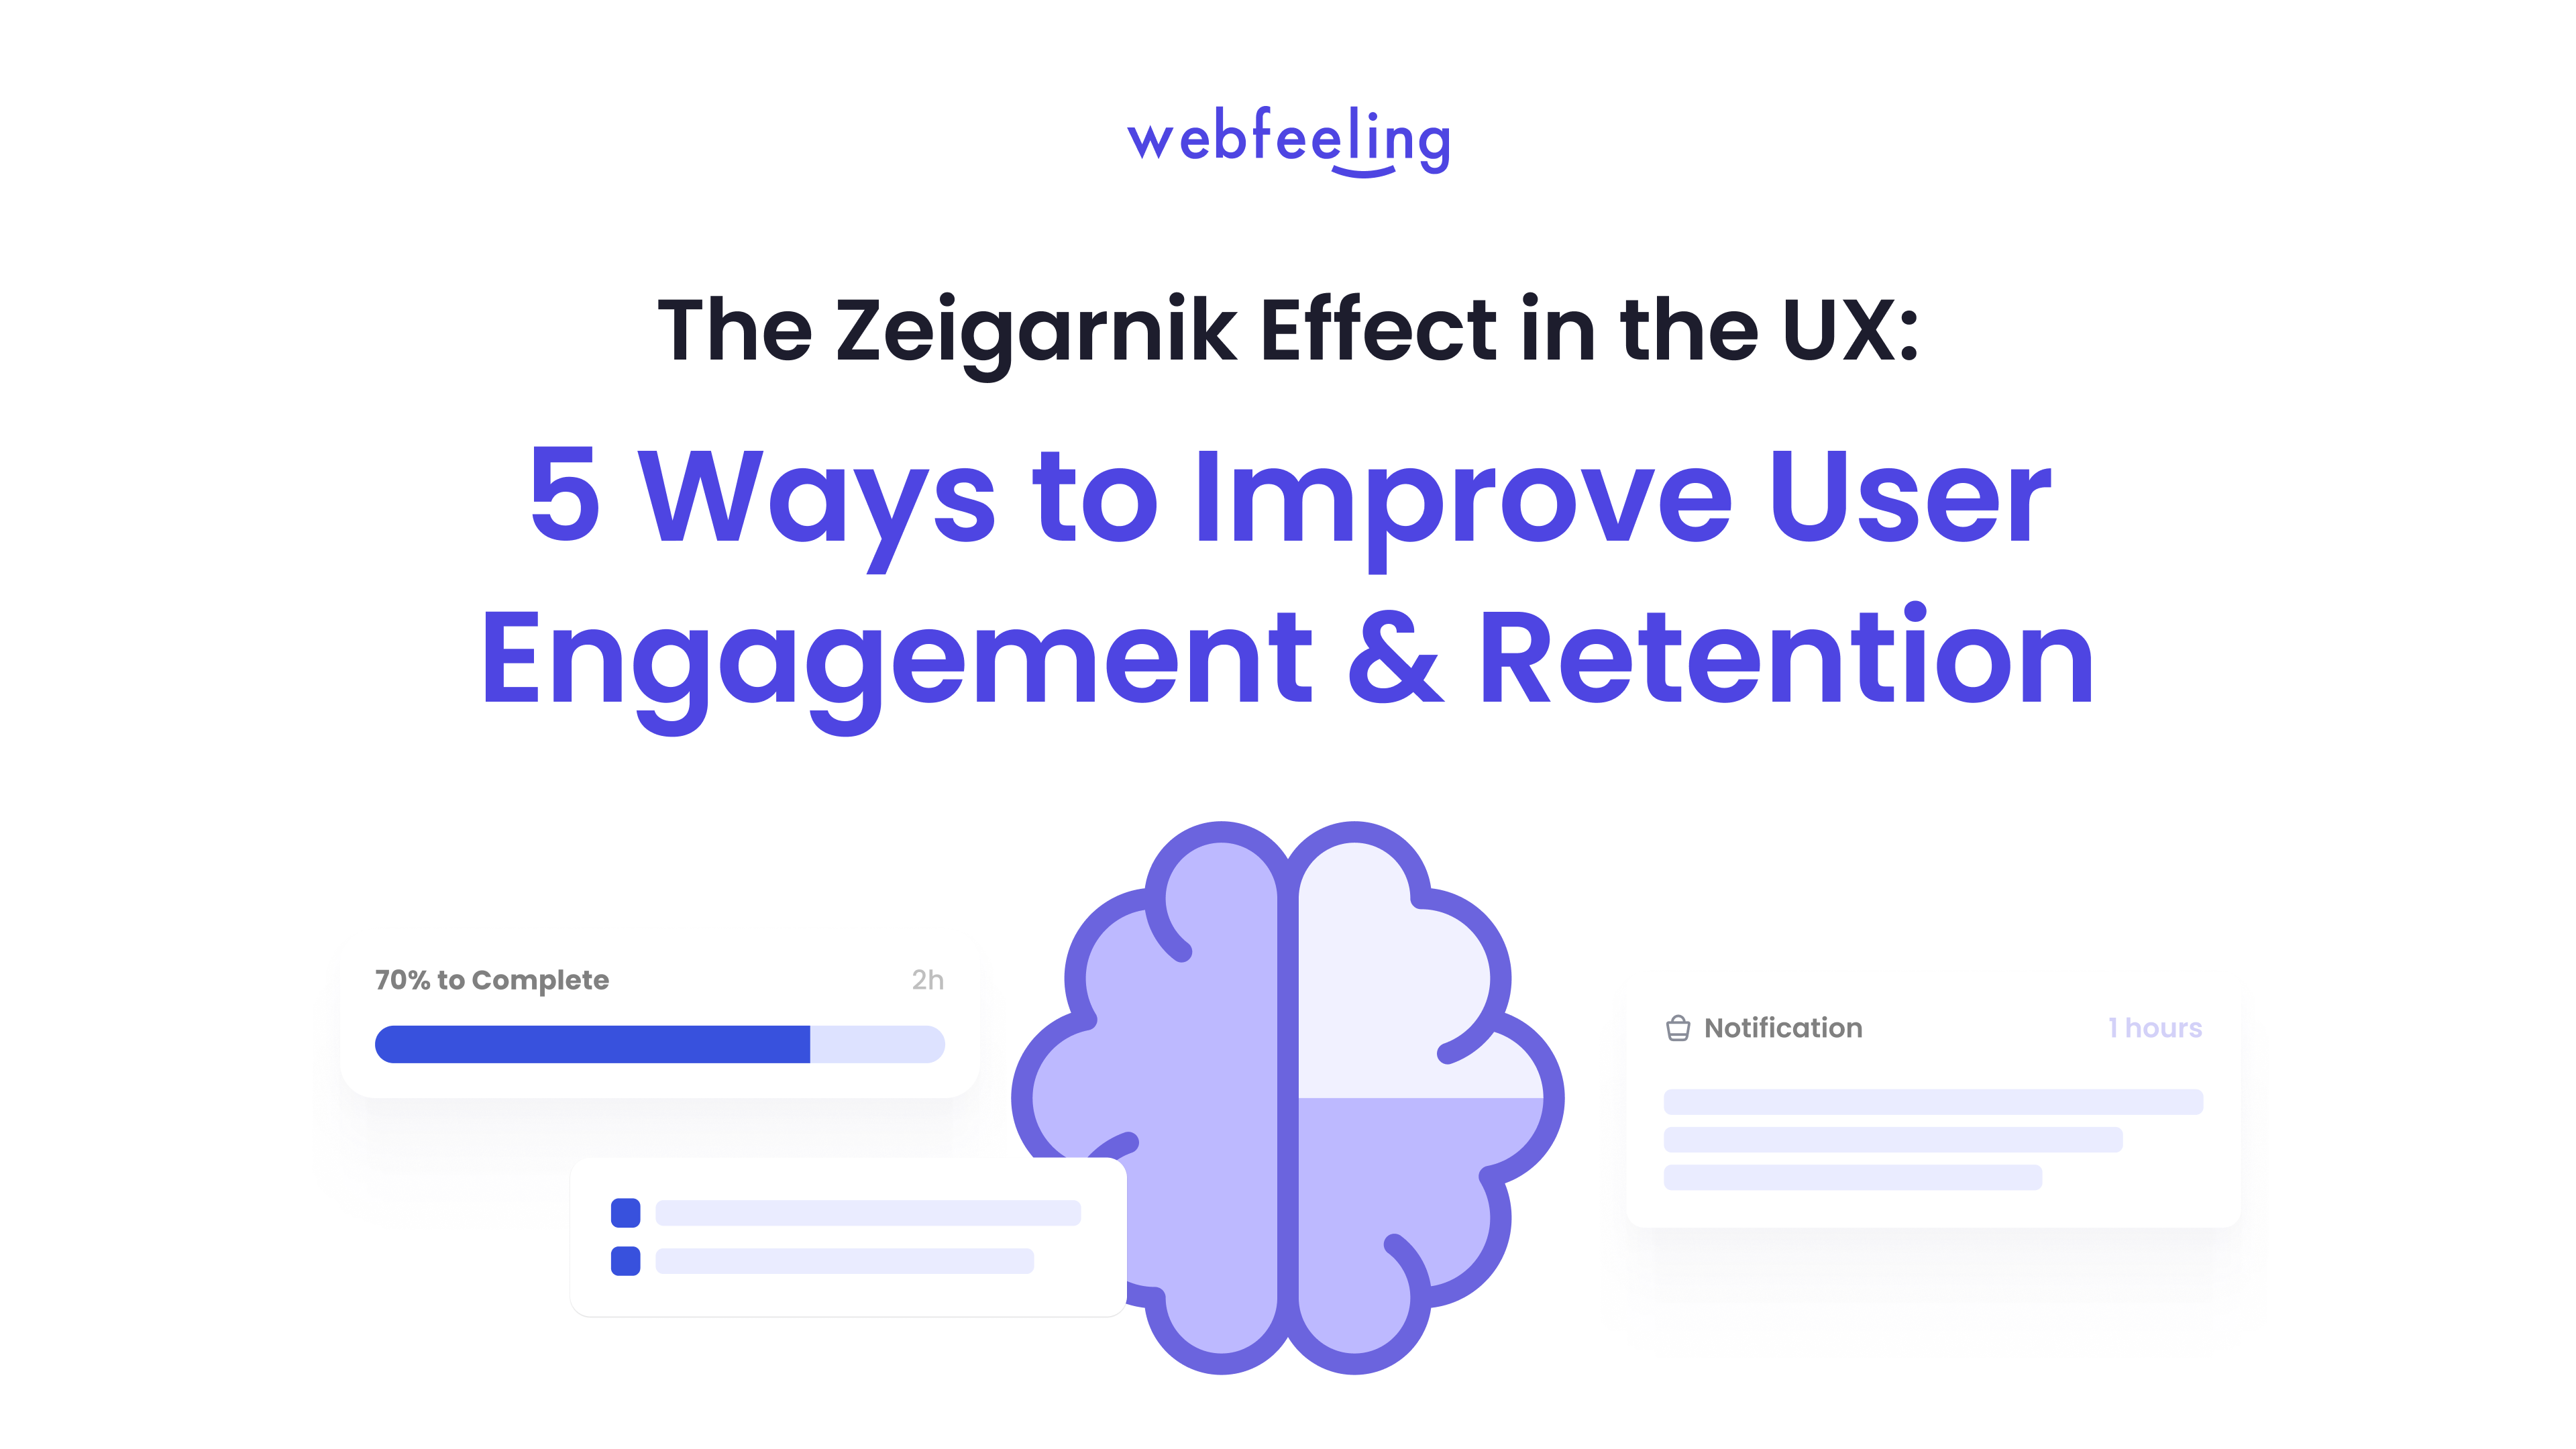 The Zeigarnik Effect in the UX: 5 Ways to Improve User Engagement & Retention